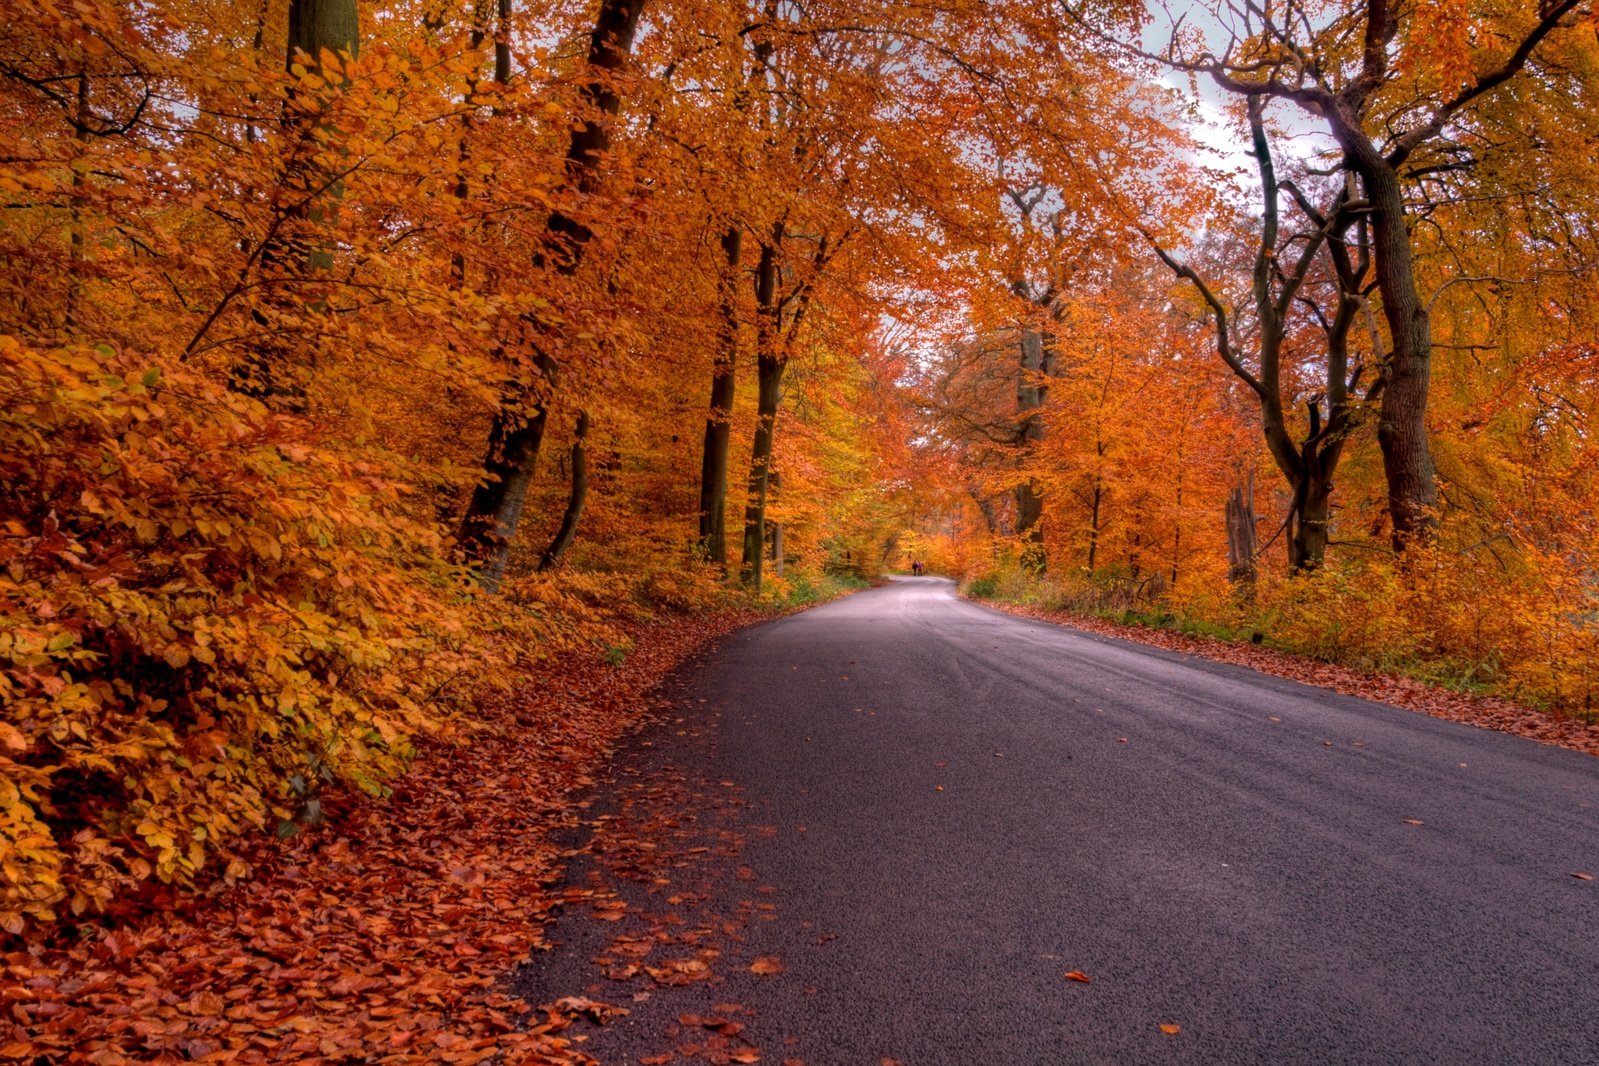 autumn trees with leaves on the ground and a road lined with trees that are red